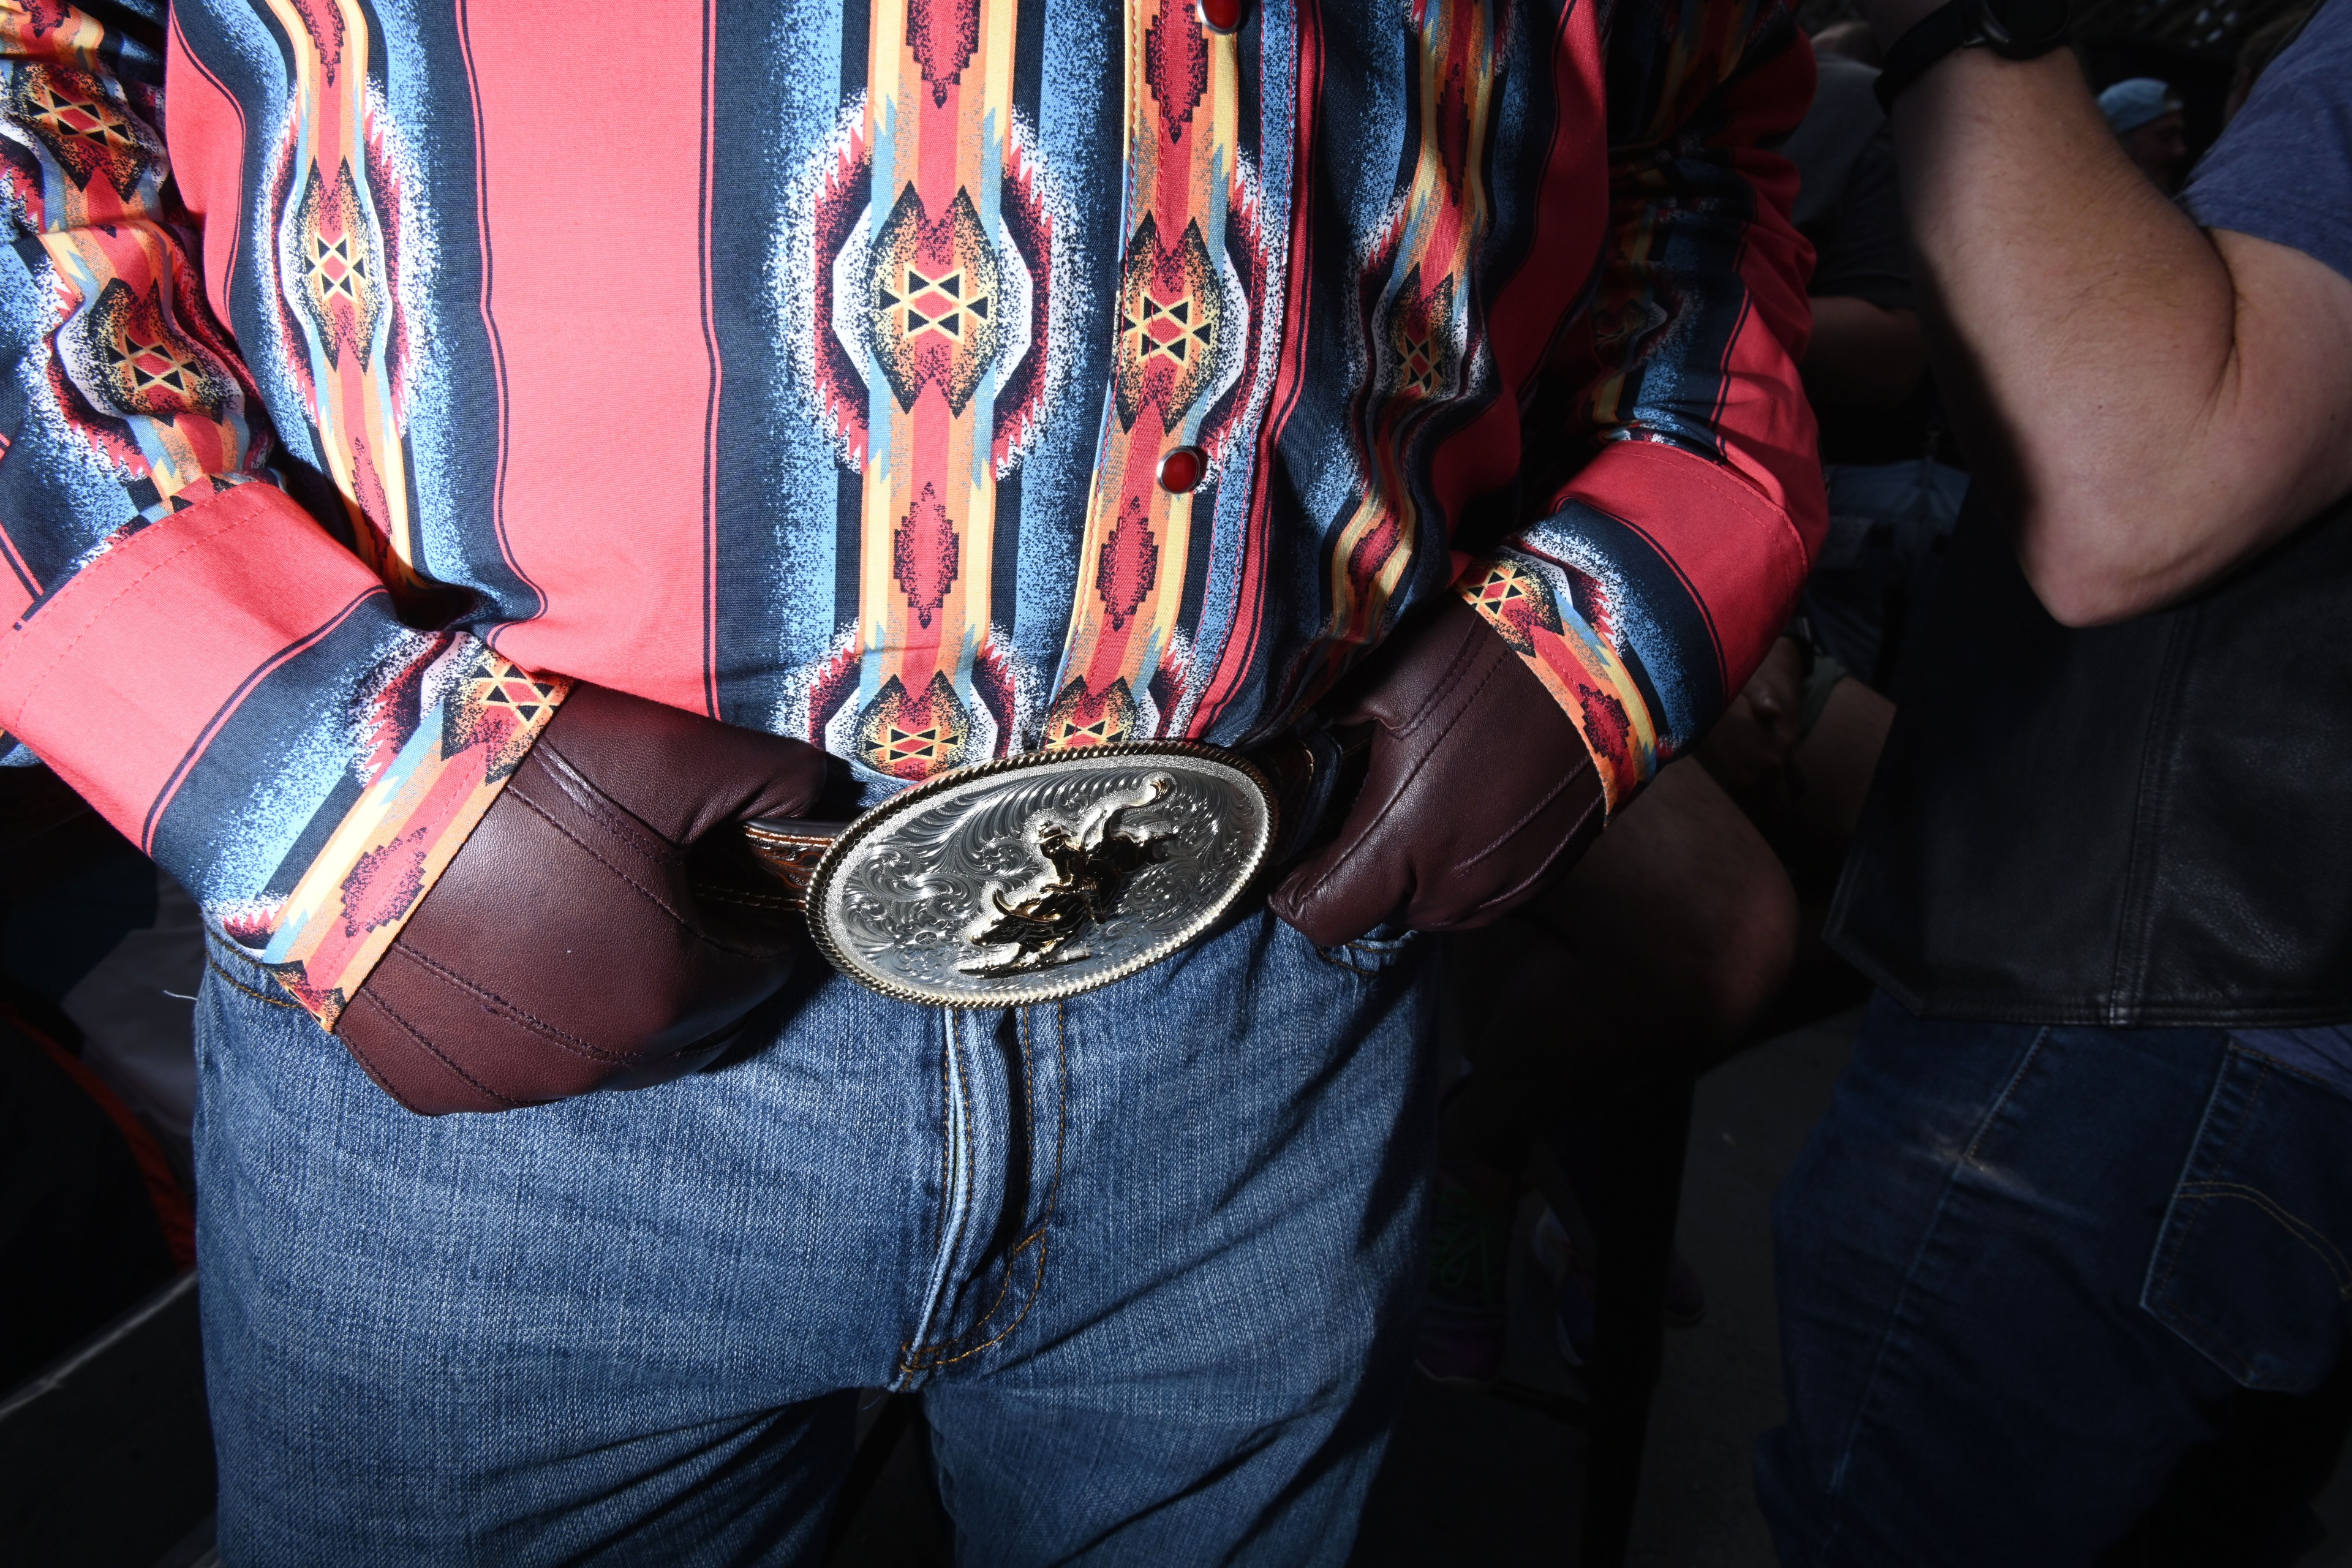 A person wears a colorful patterned shirt, blue jeans, and brown leather gloves, with hands resting on a large ornate silver belt buckle.